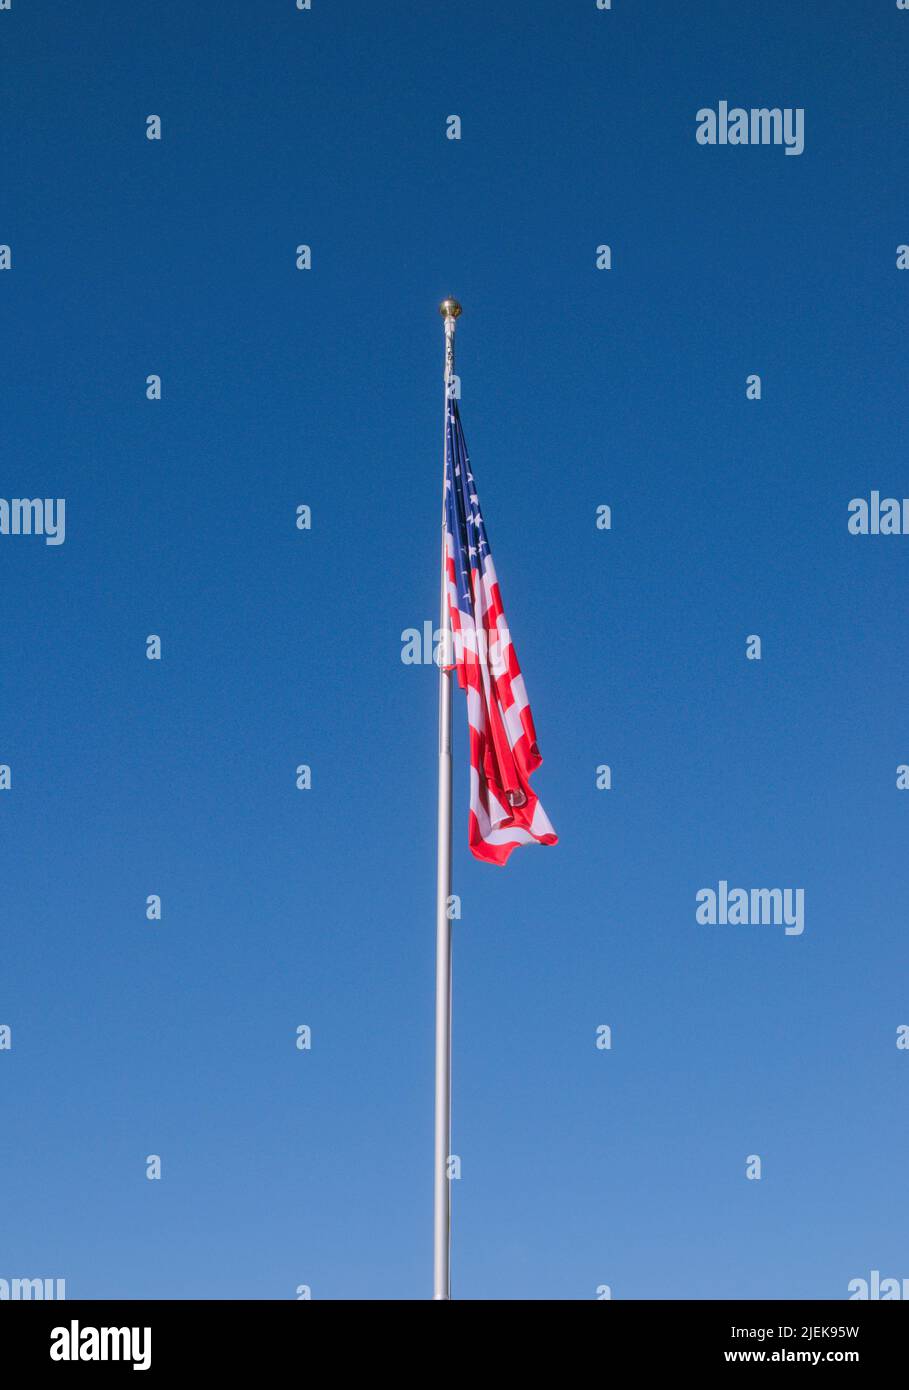 American Flag hanging down against blue sky Stock Photo